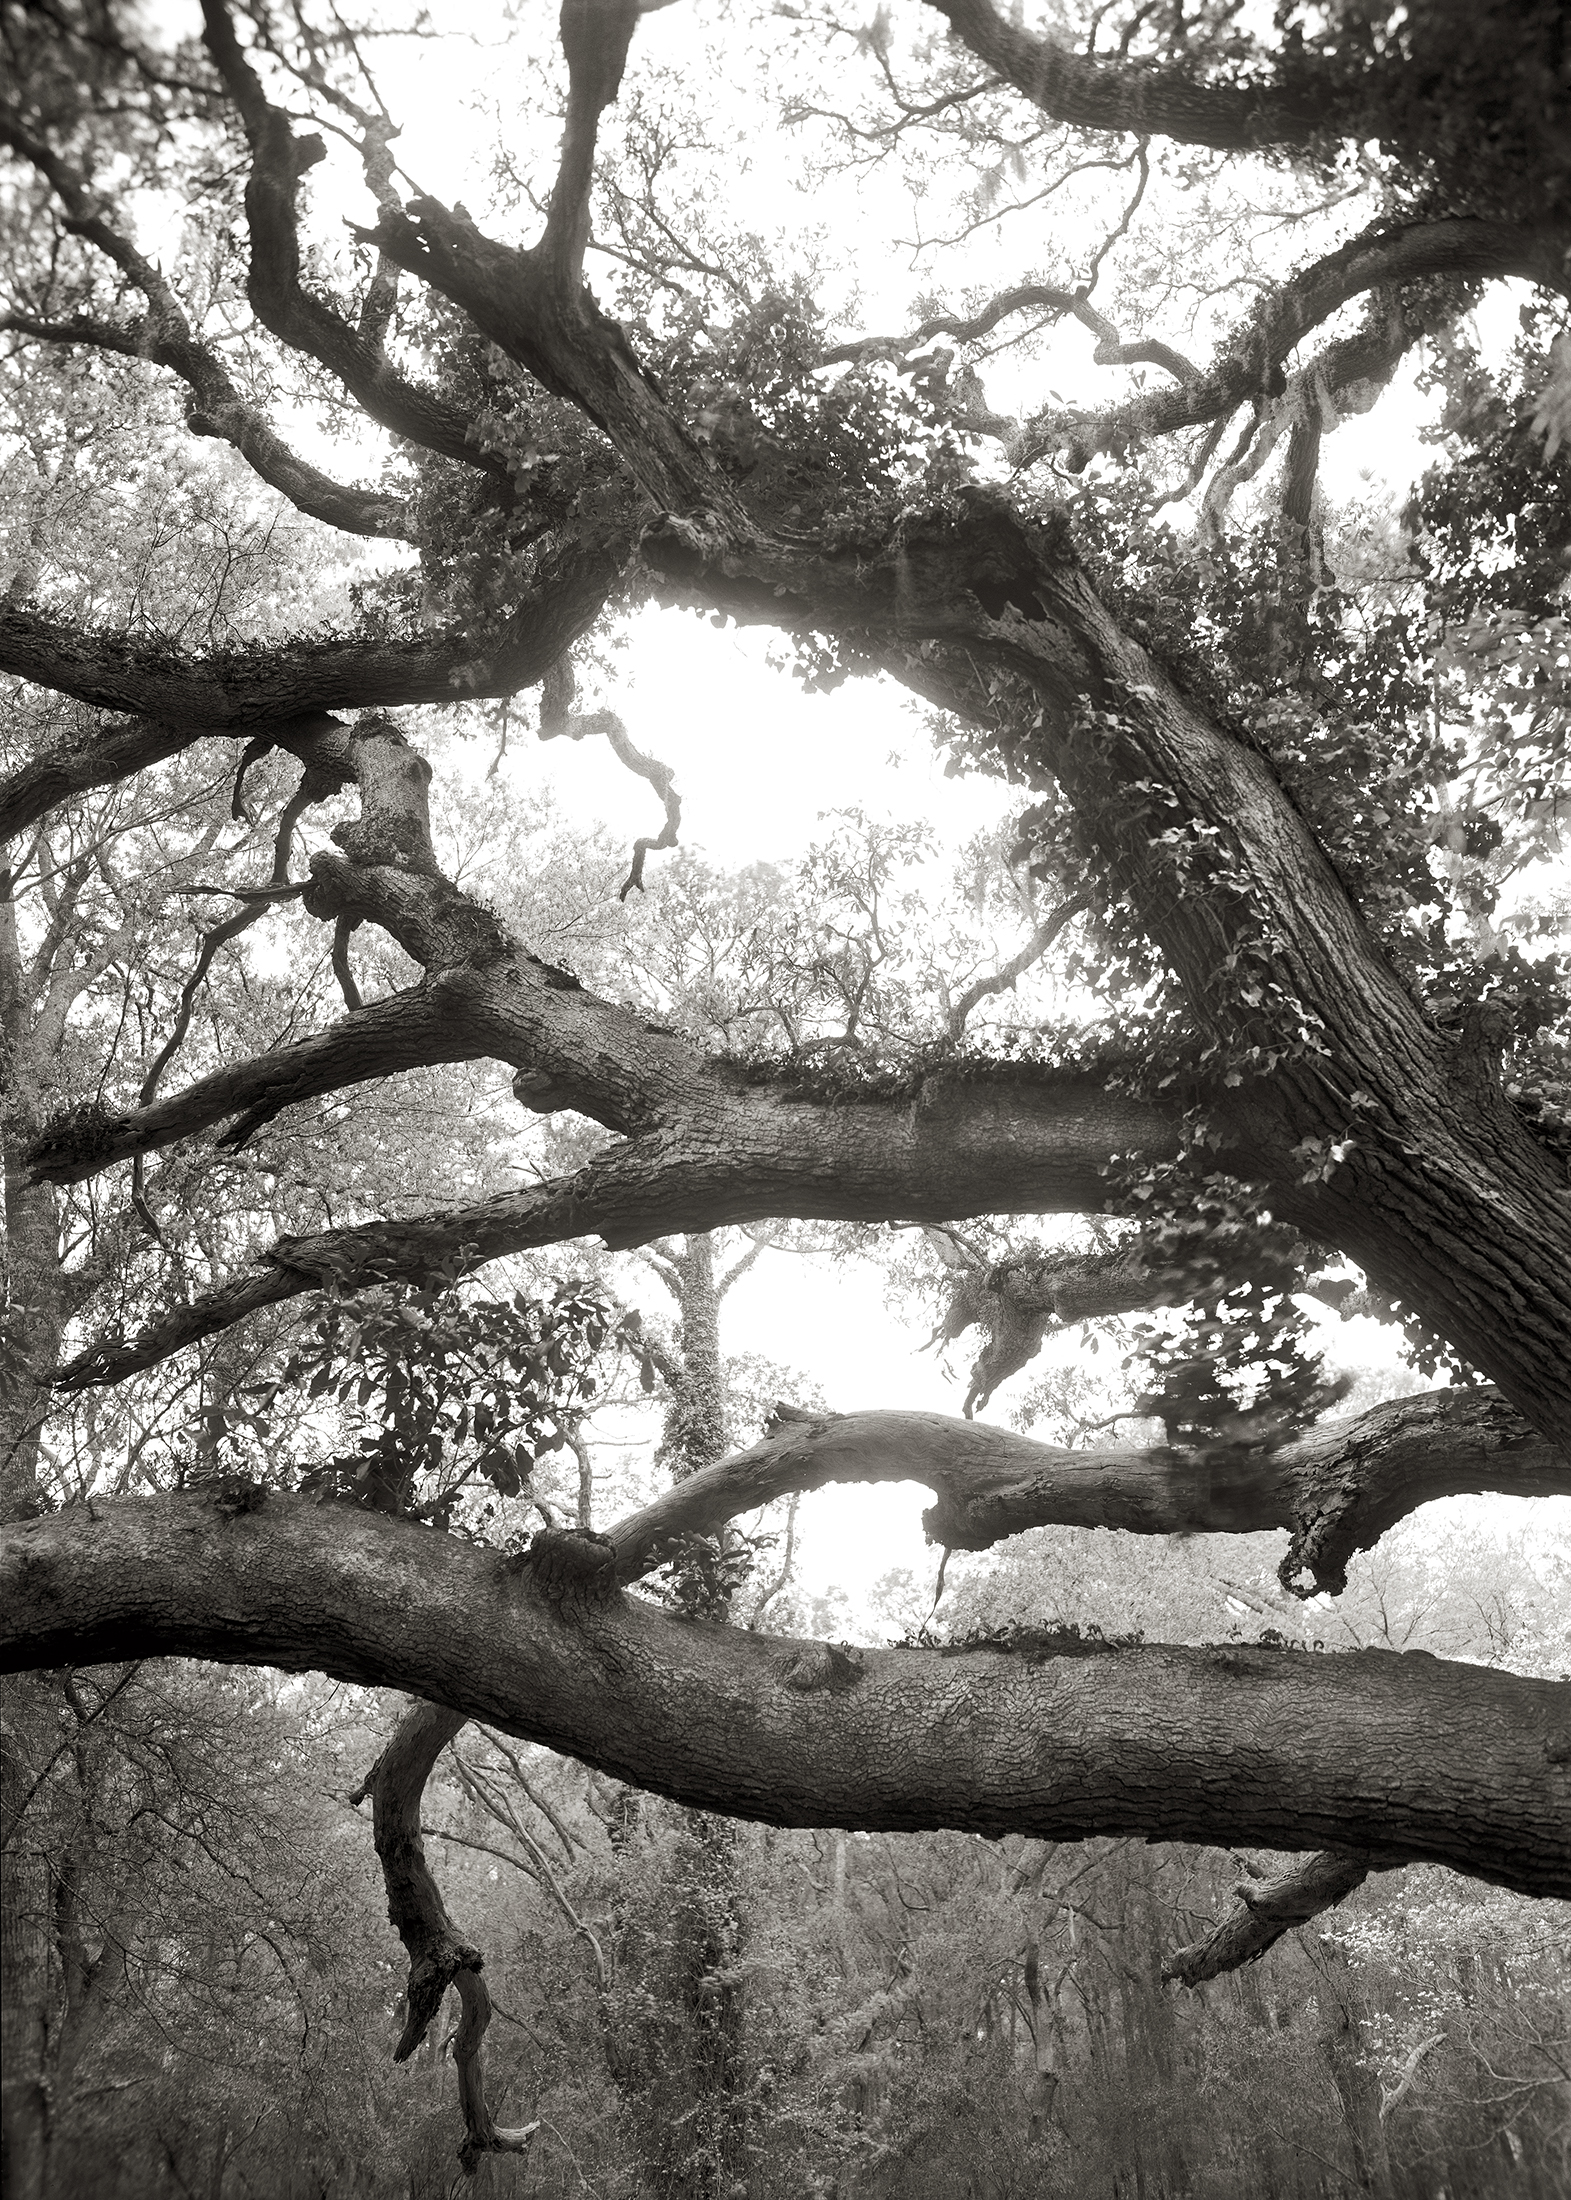  LIMBS, OVER ONE HUNDRED YEARS OLD, 2009 